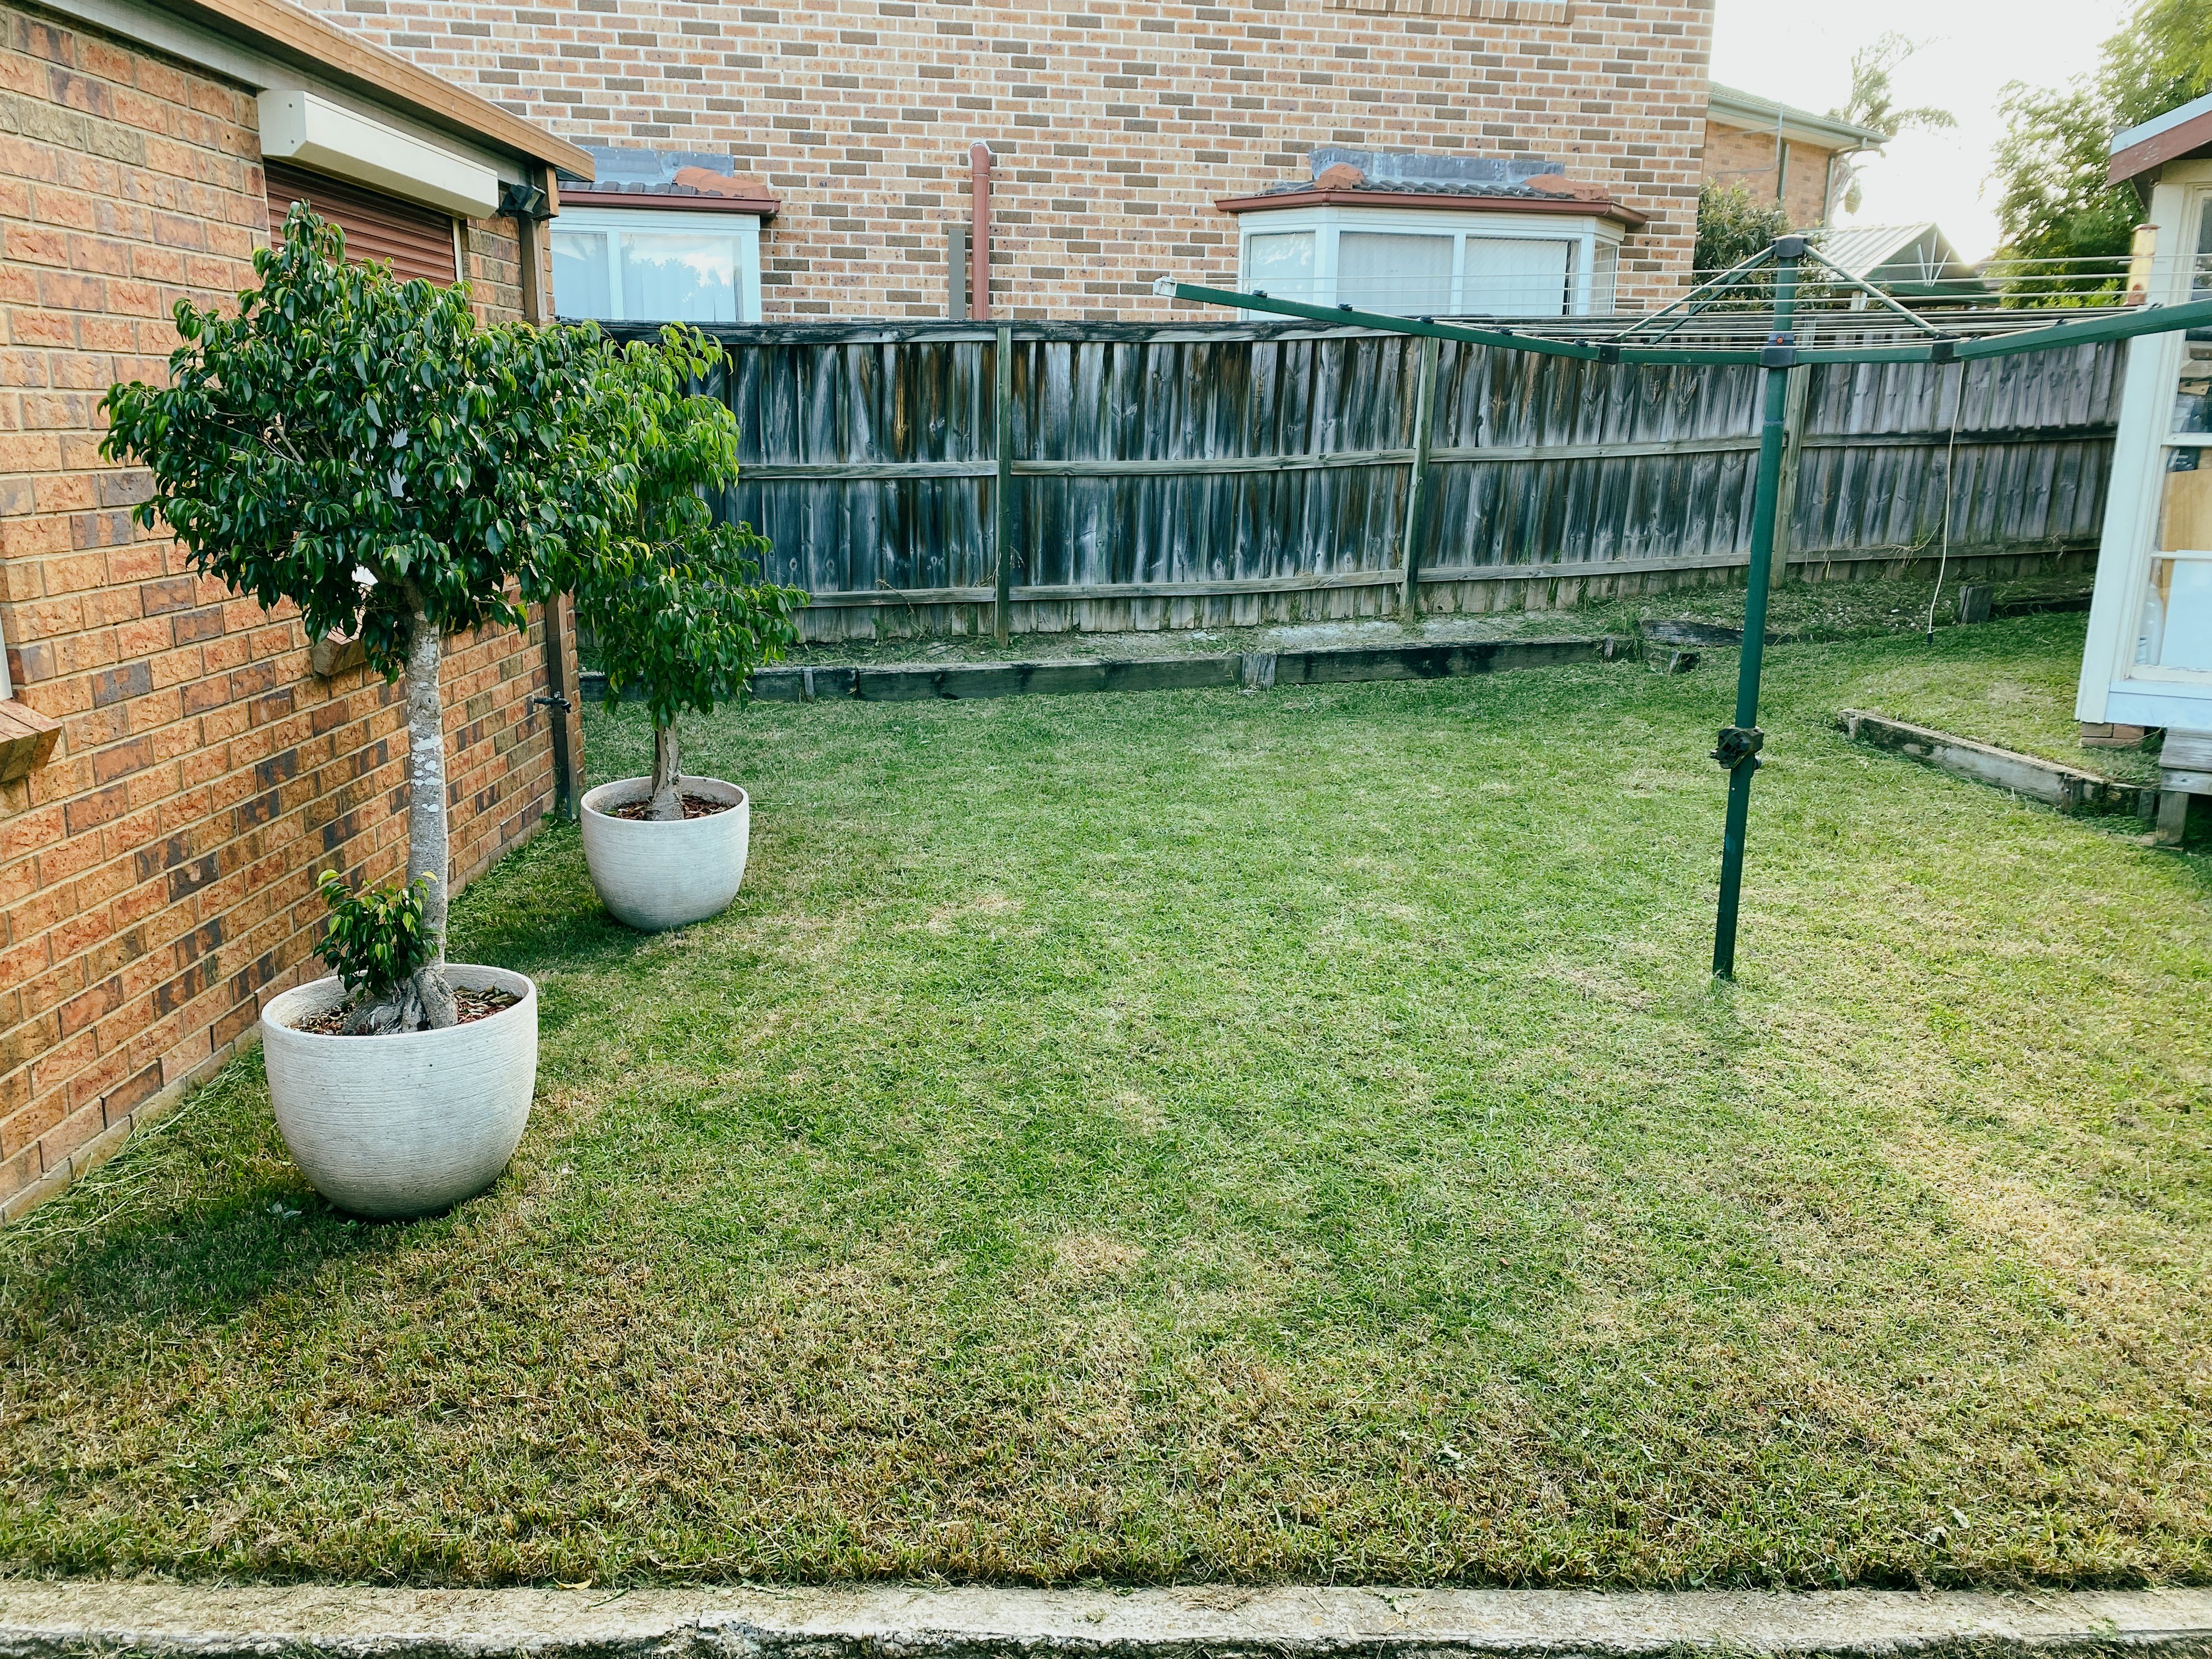 A photo looking out at the back yard. The fence is rickety as hell but the grass is neat and tidy here as well. There's two trees in big pots at the left.